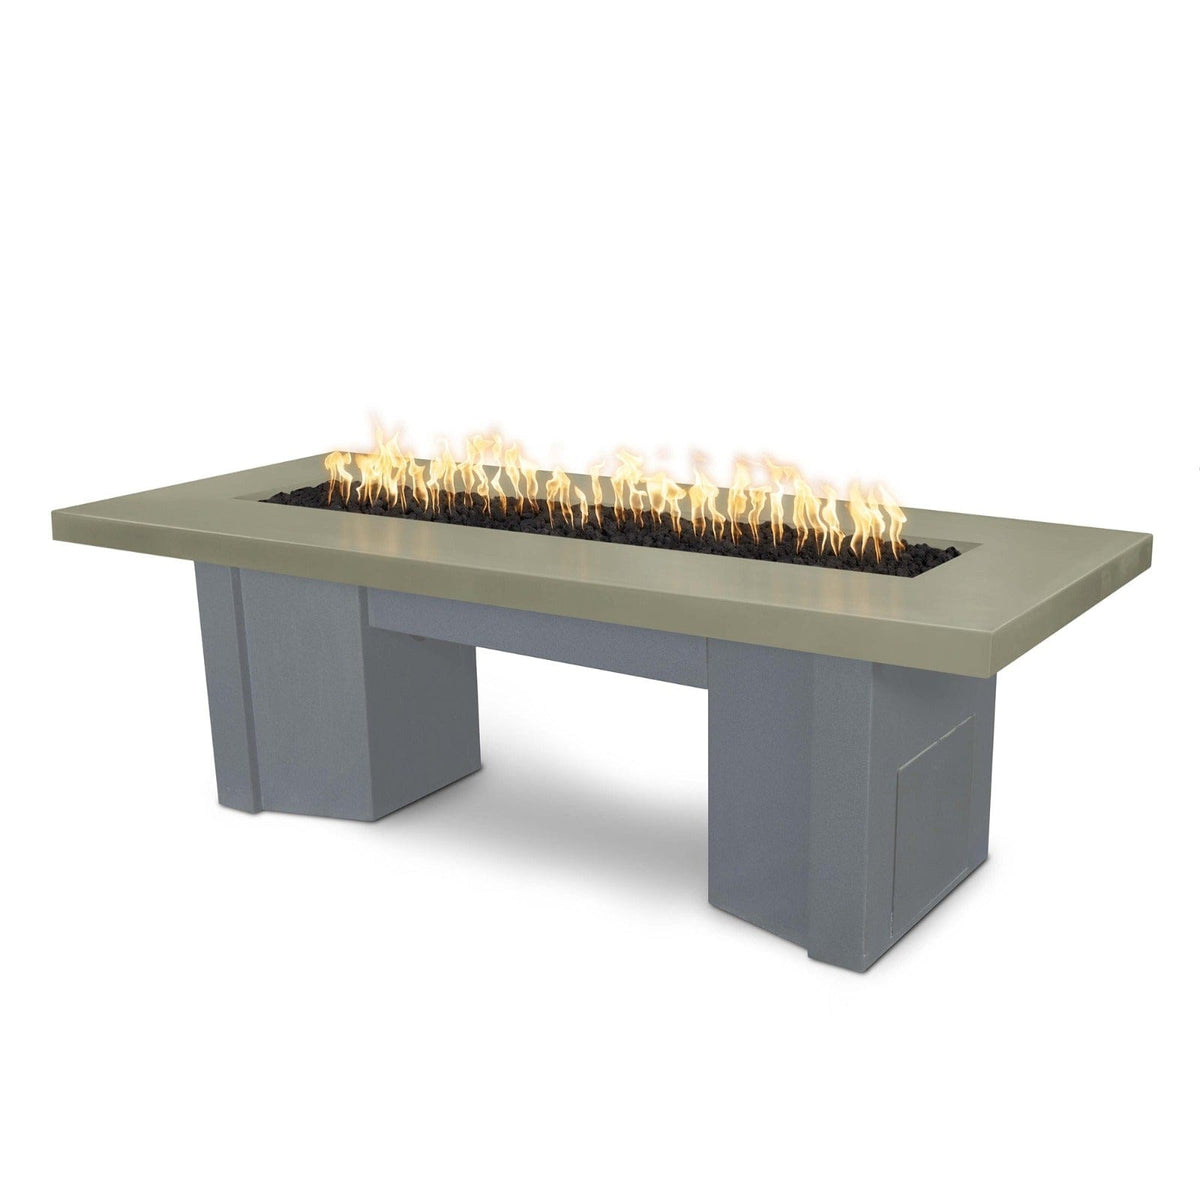 The Outdoor Plus Fire Features Ash (-ASH) / Gray Powder Coated Steel (-GRY) The Outdoor Plus 78&quot; Alameda Fire Table Smooth Concrete in Liquid Propane - Match Lit with Flame Sense System / OPT-ALMGFRC78FSML-LP